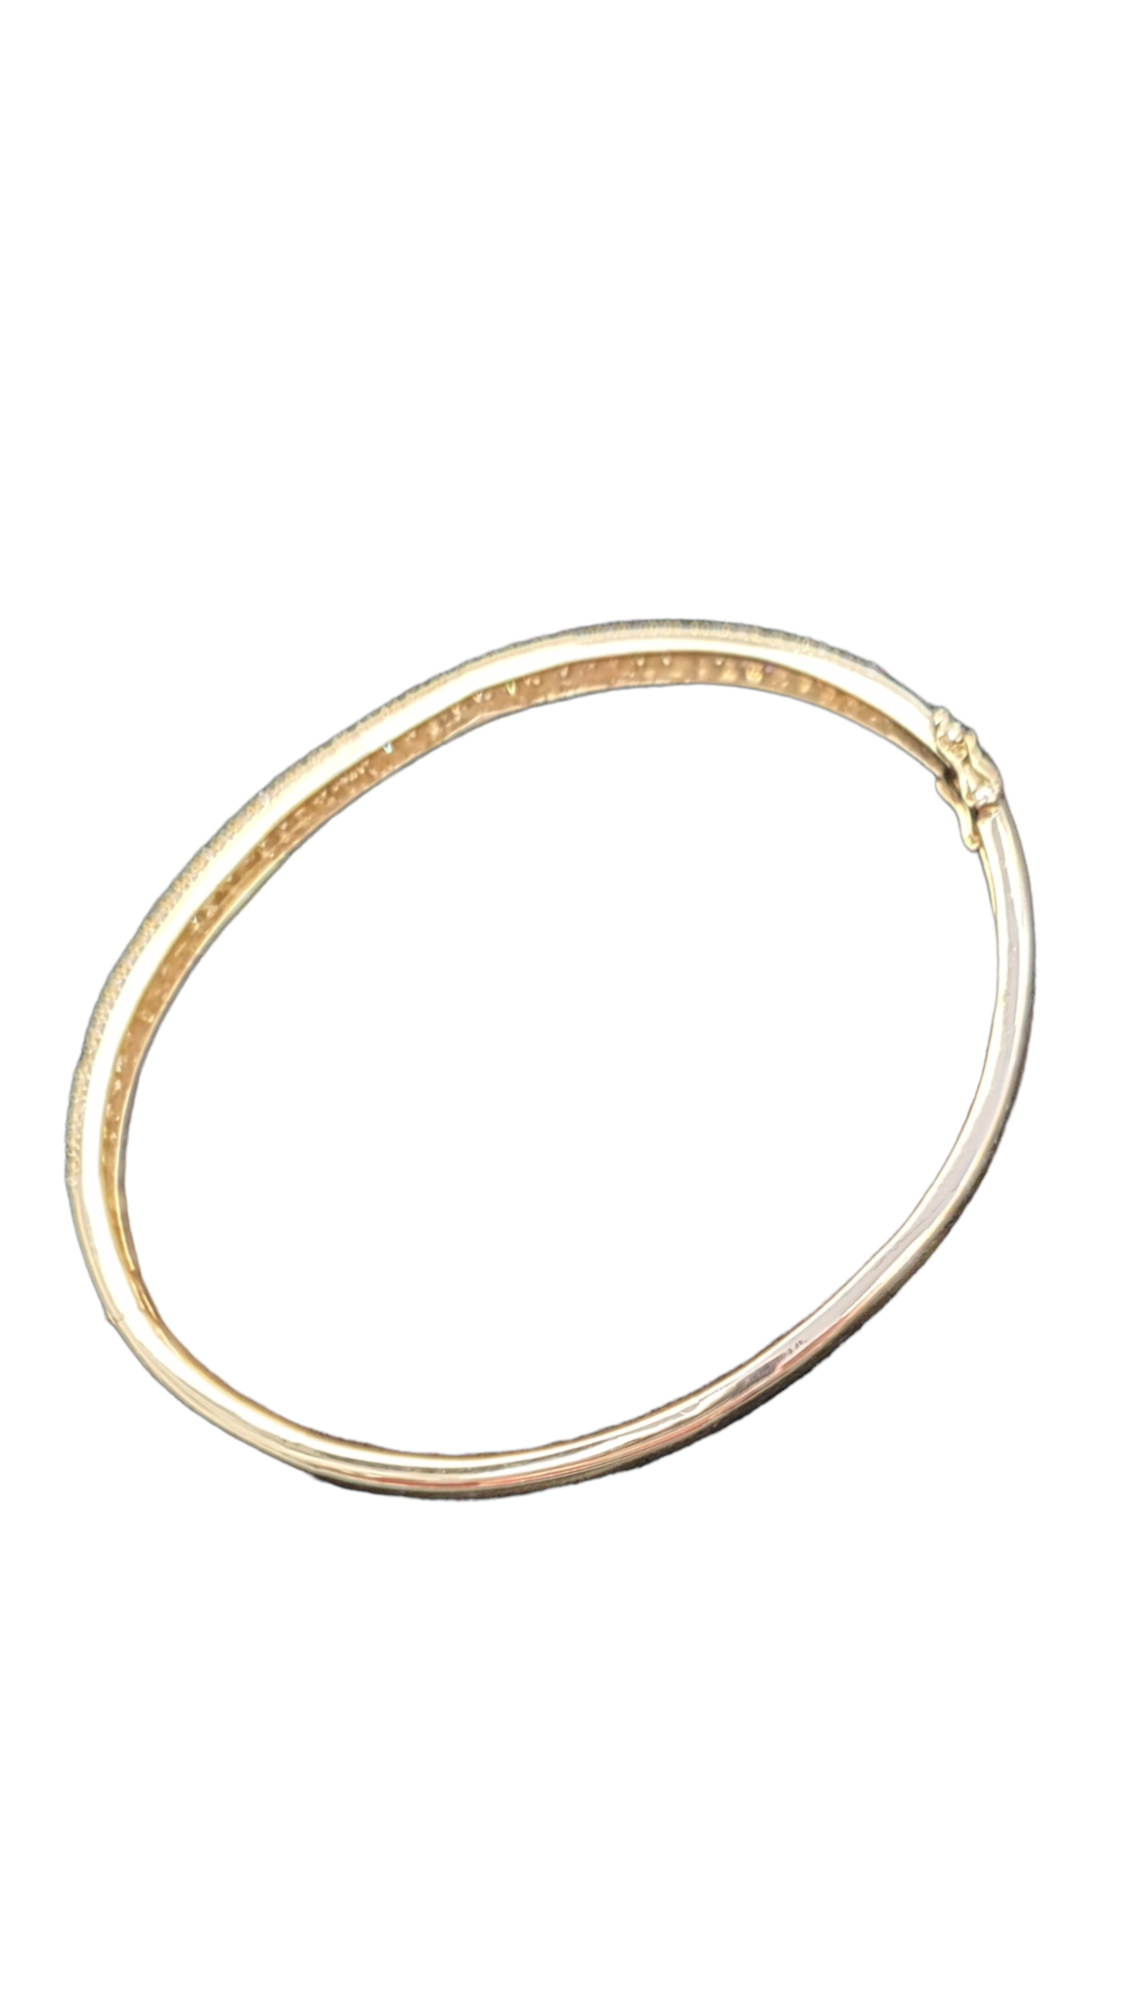 Diamond Pave Bangle Bracelet made in 14-Karat Yellow Gold with Double Safety latch